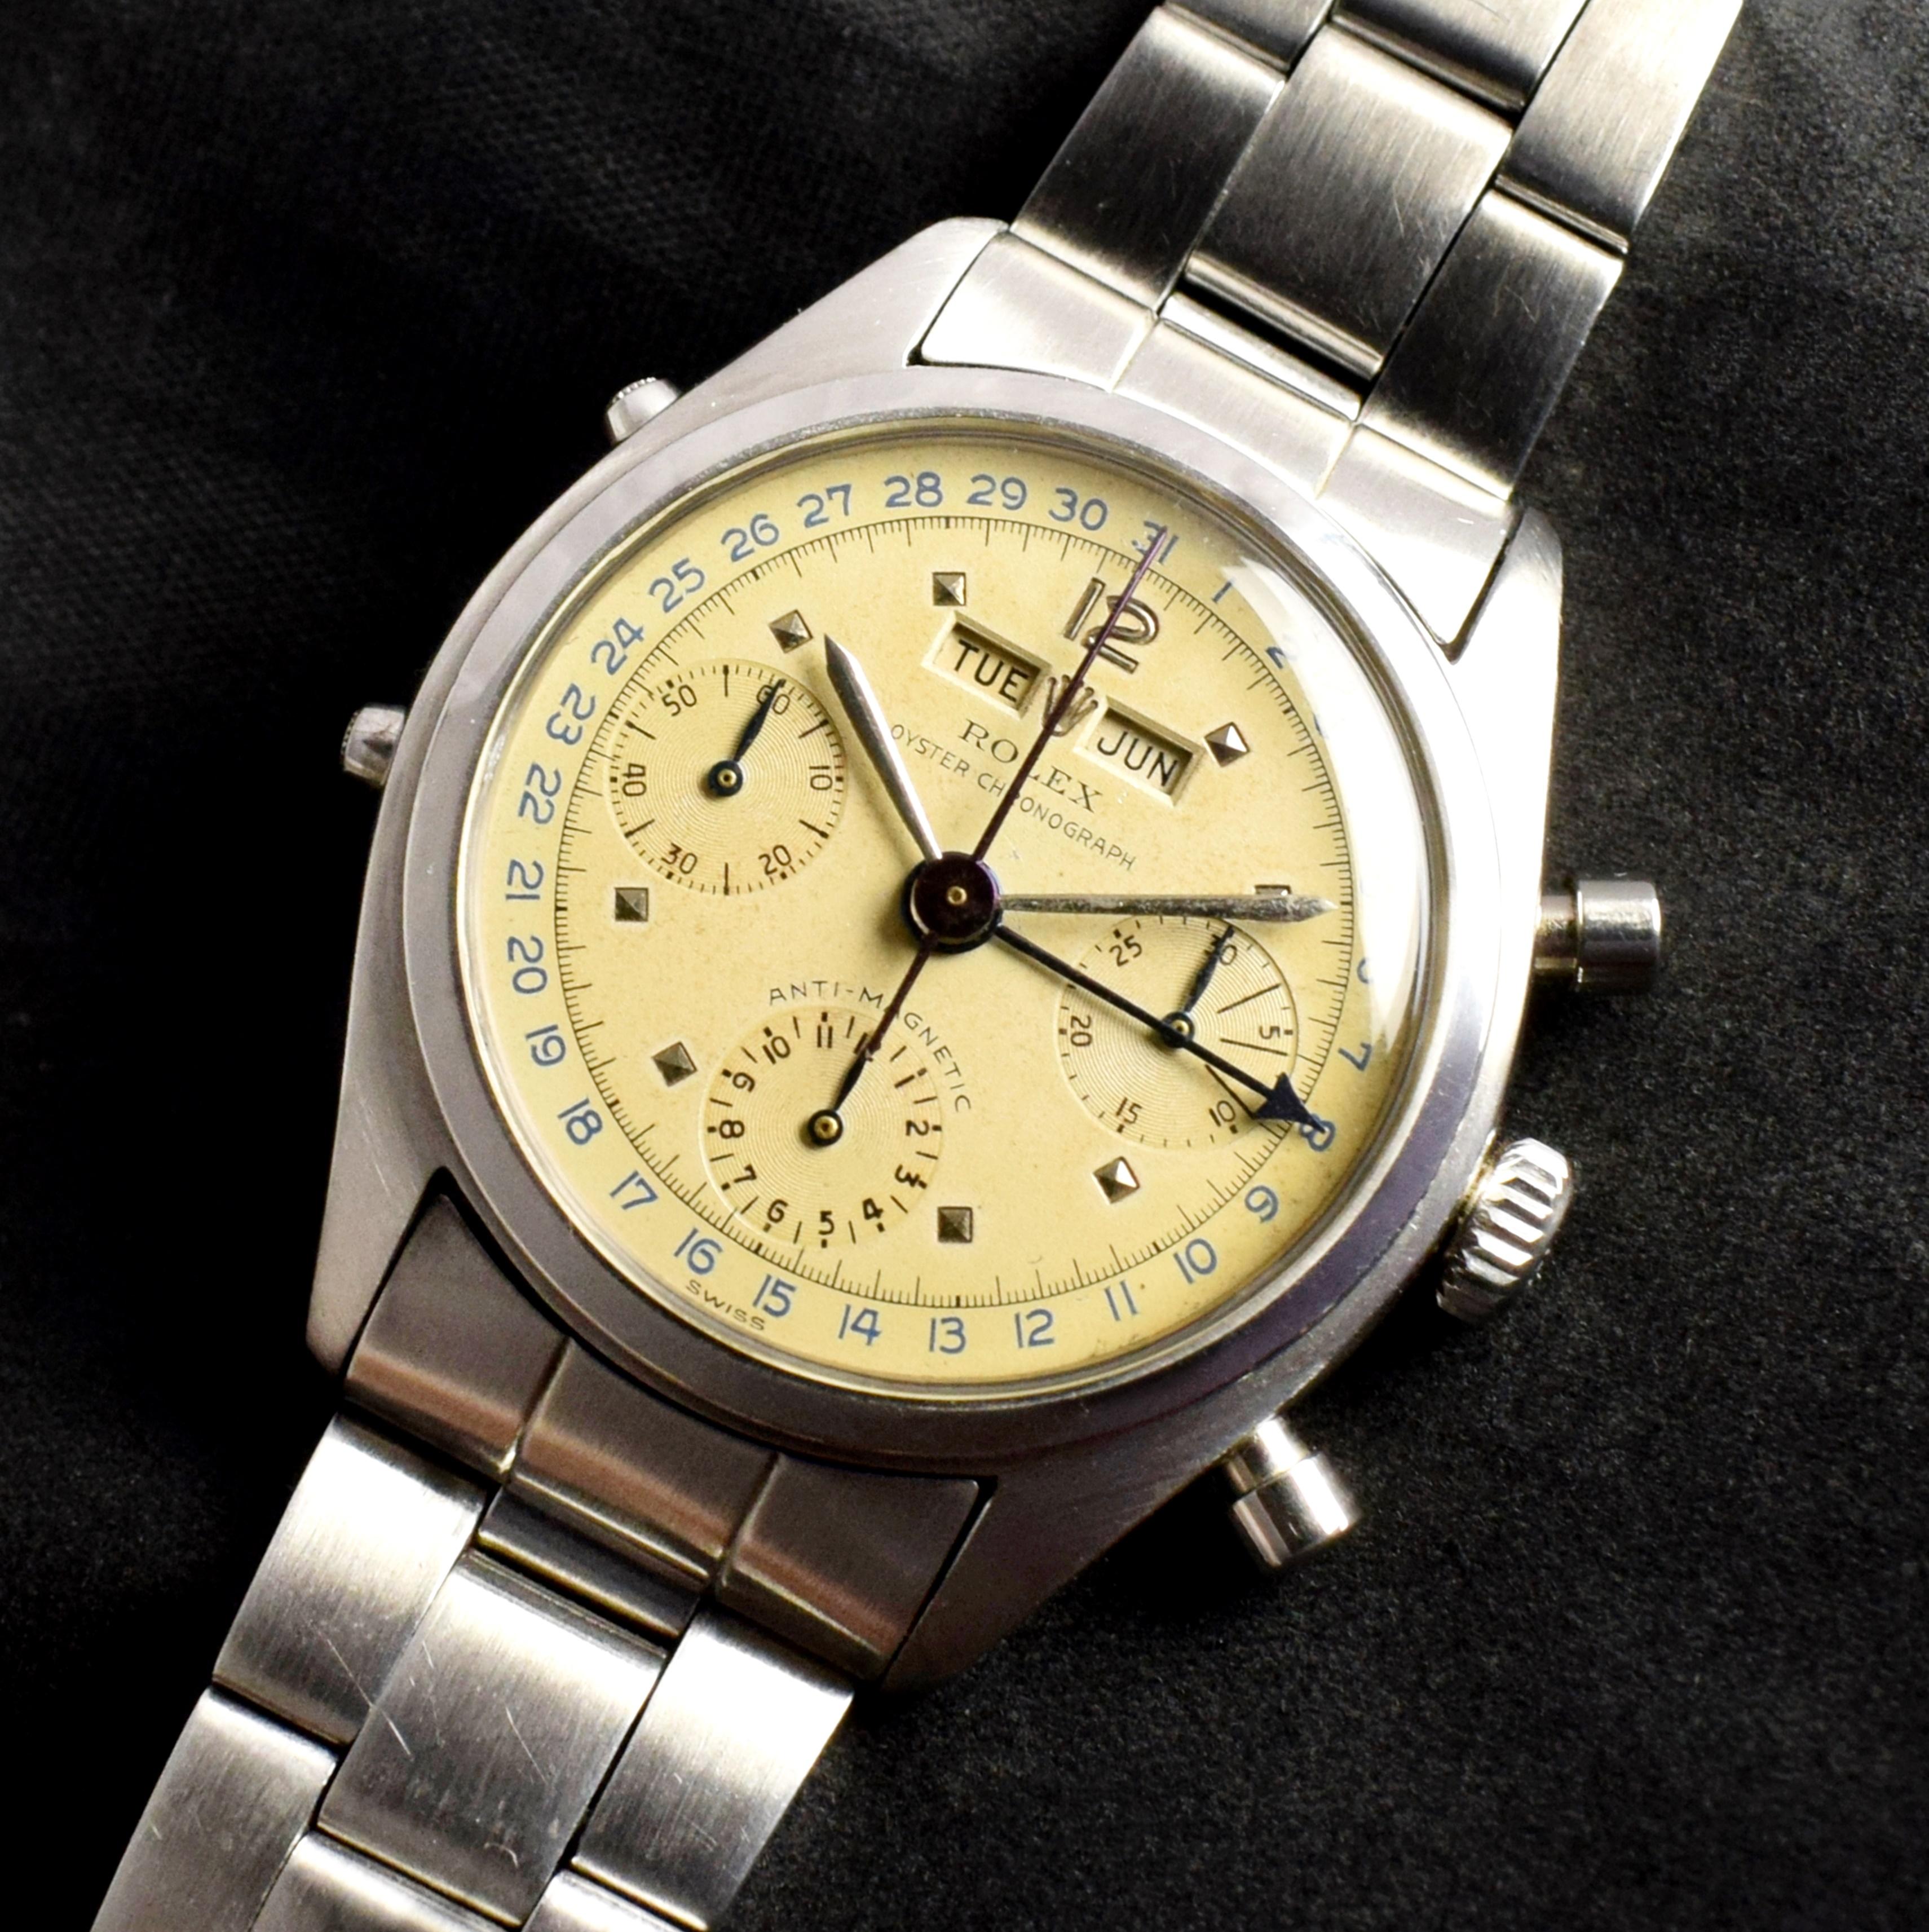 Brand: Vintage Rolex
Model: 6036
Year: 1954
Serial number: 94xxxx
Reference: OT1522

Jean Claude Killy is one of the legendary Olympic Ski champions who has one of the longest member of Rolex Board of Directors for over 40 years. He has been